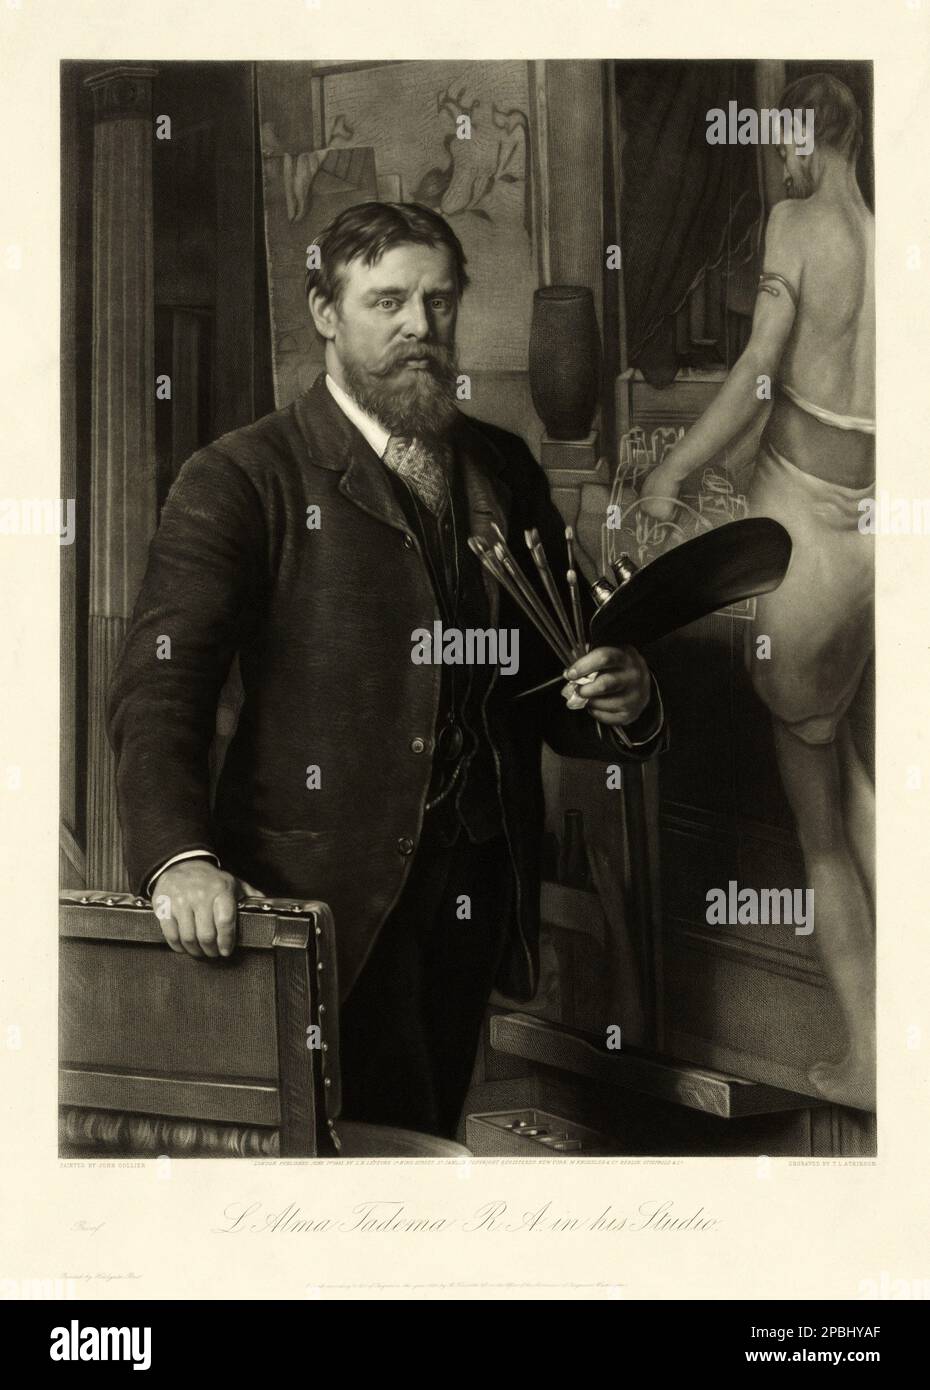 1885 , London, Great Britain   : Sir Lawrence Alma-Tadema ( January 8, 1836, Dronrijp, the Netherlands - June 25, 1912 Wiesbaden, Germany ) was one of the finest and most distinctive of the Victorian painters . Engraving portrait in his Studio , from a painting by JOHN COLLIER , engraved by T. L. Atkinson  . Dutch born, he moved to London in 1870 and spent the rest of his life there . He was a classical-subject painter and became famous for his depictions of the luxury and decadence of the Roman Empire, with langorous figures set in fabulous marbled interiors or against a backdrop of dazzling Stock Photo